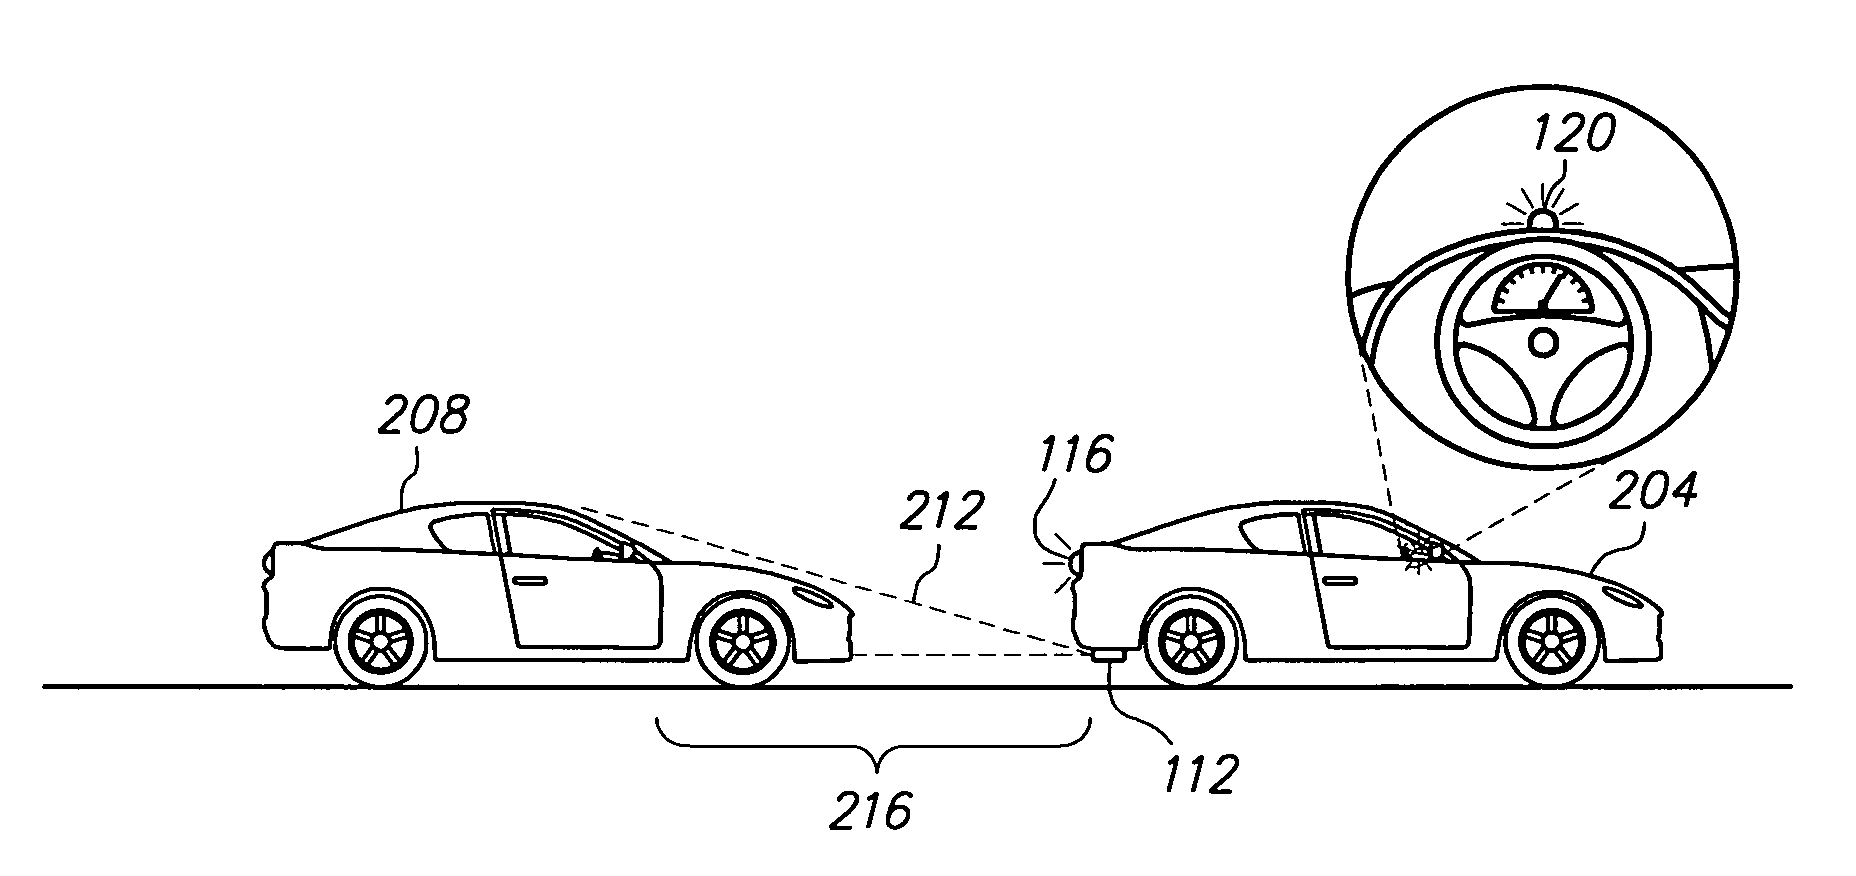 Brake light warning system with early warning feature